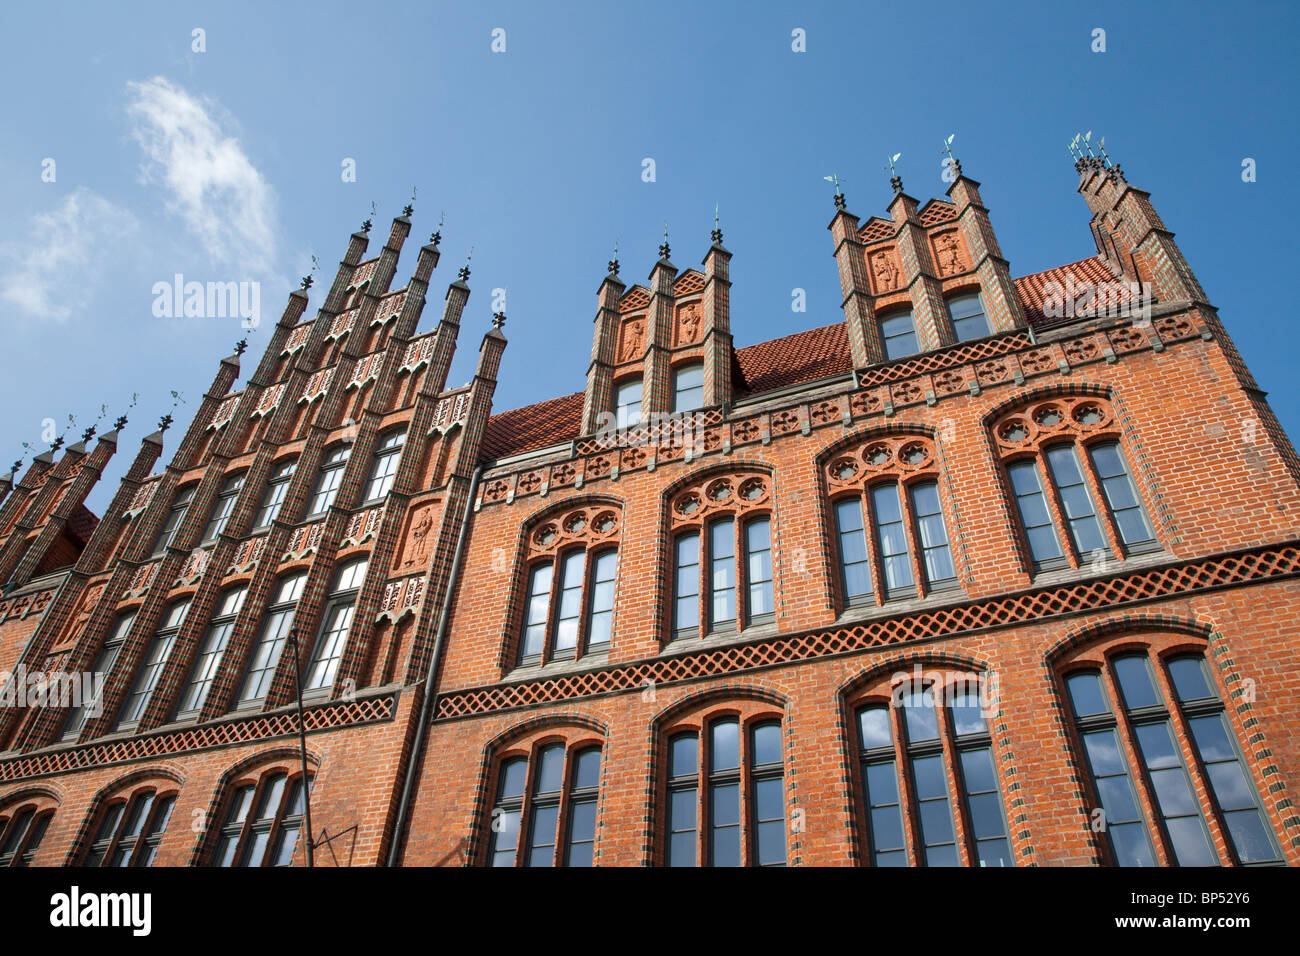 OLD TOWN HALL, HANOVER, LOWER SAXONY, GERMANY Stock Photo